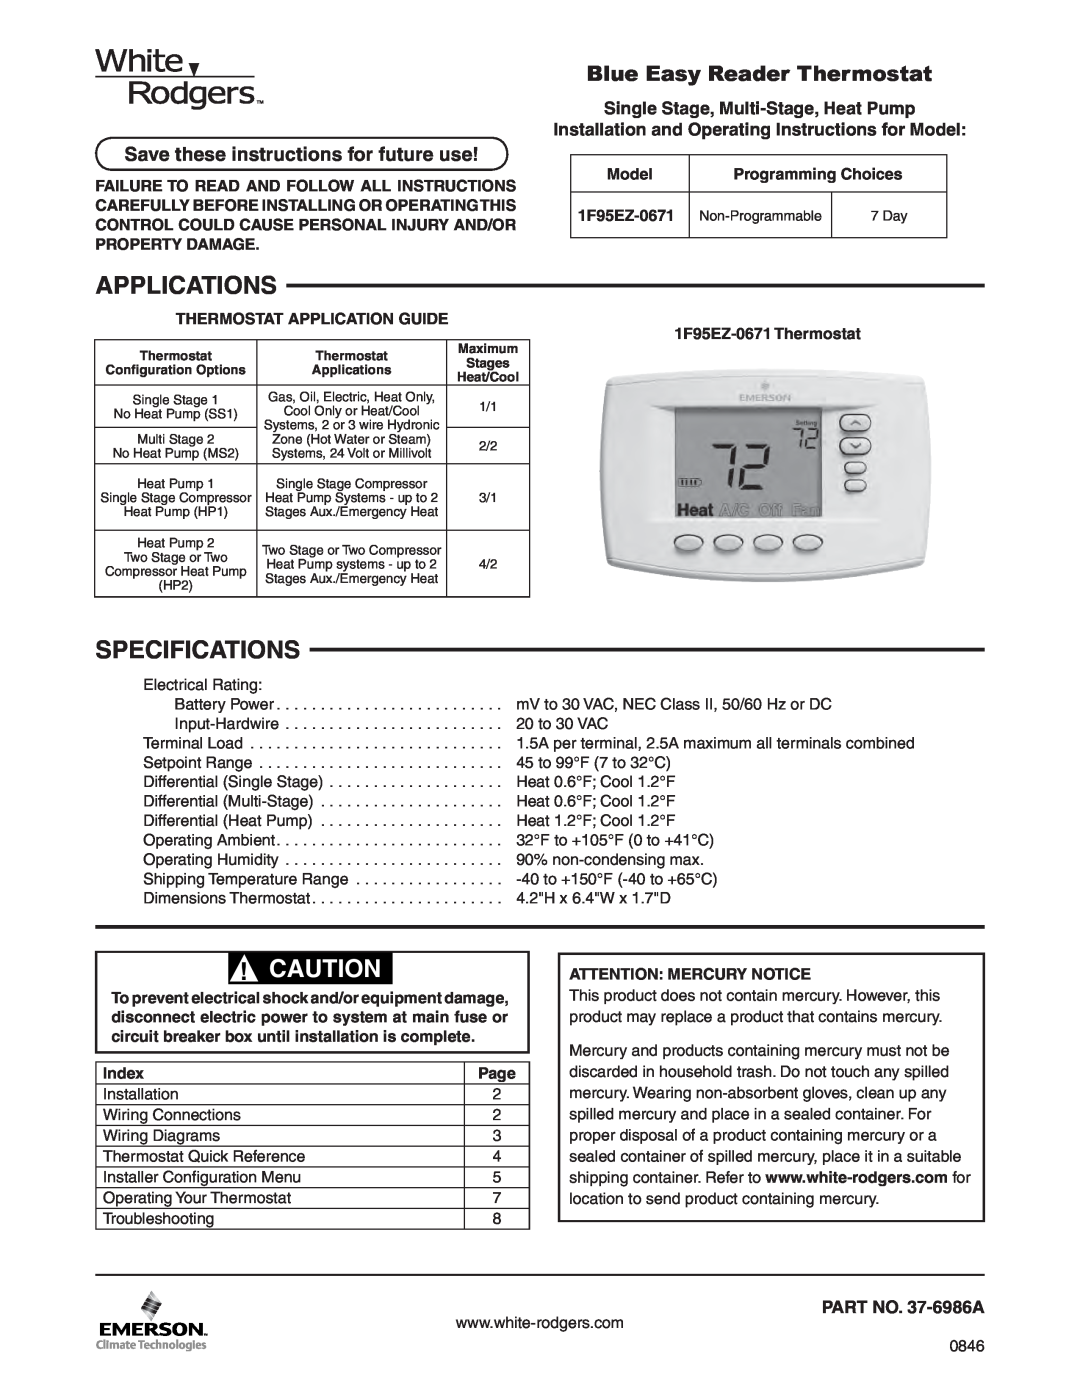 White Rodgers 1F95EZ-0671 specifications Applications, Specifications, Save these instructions for future use, Model, Page 